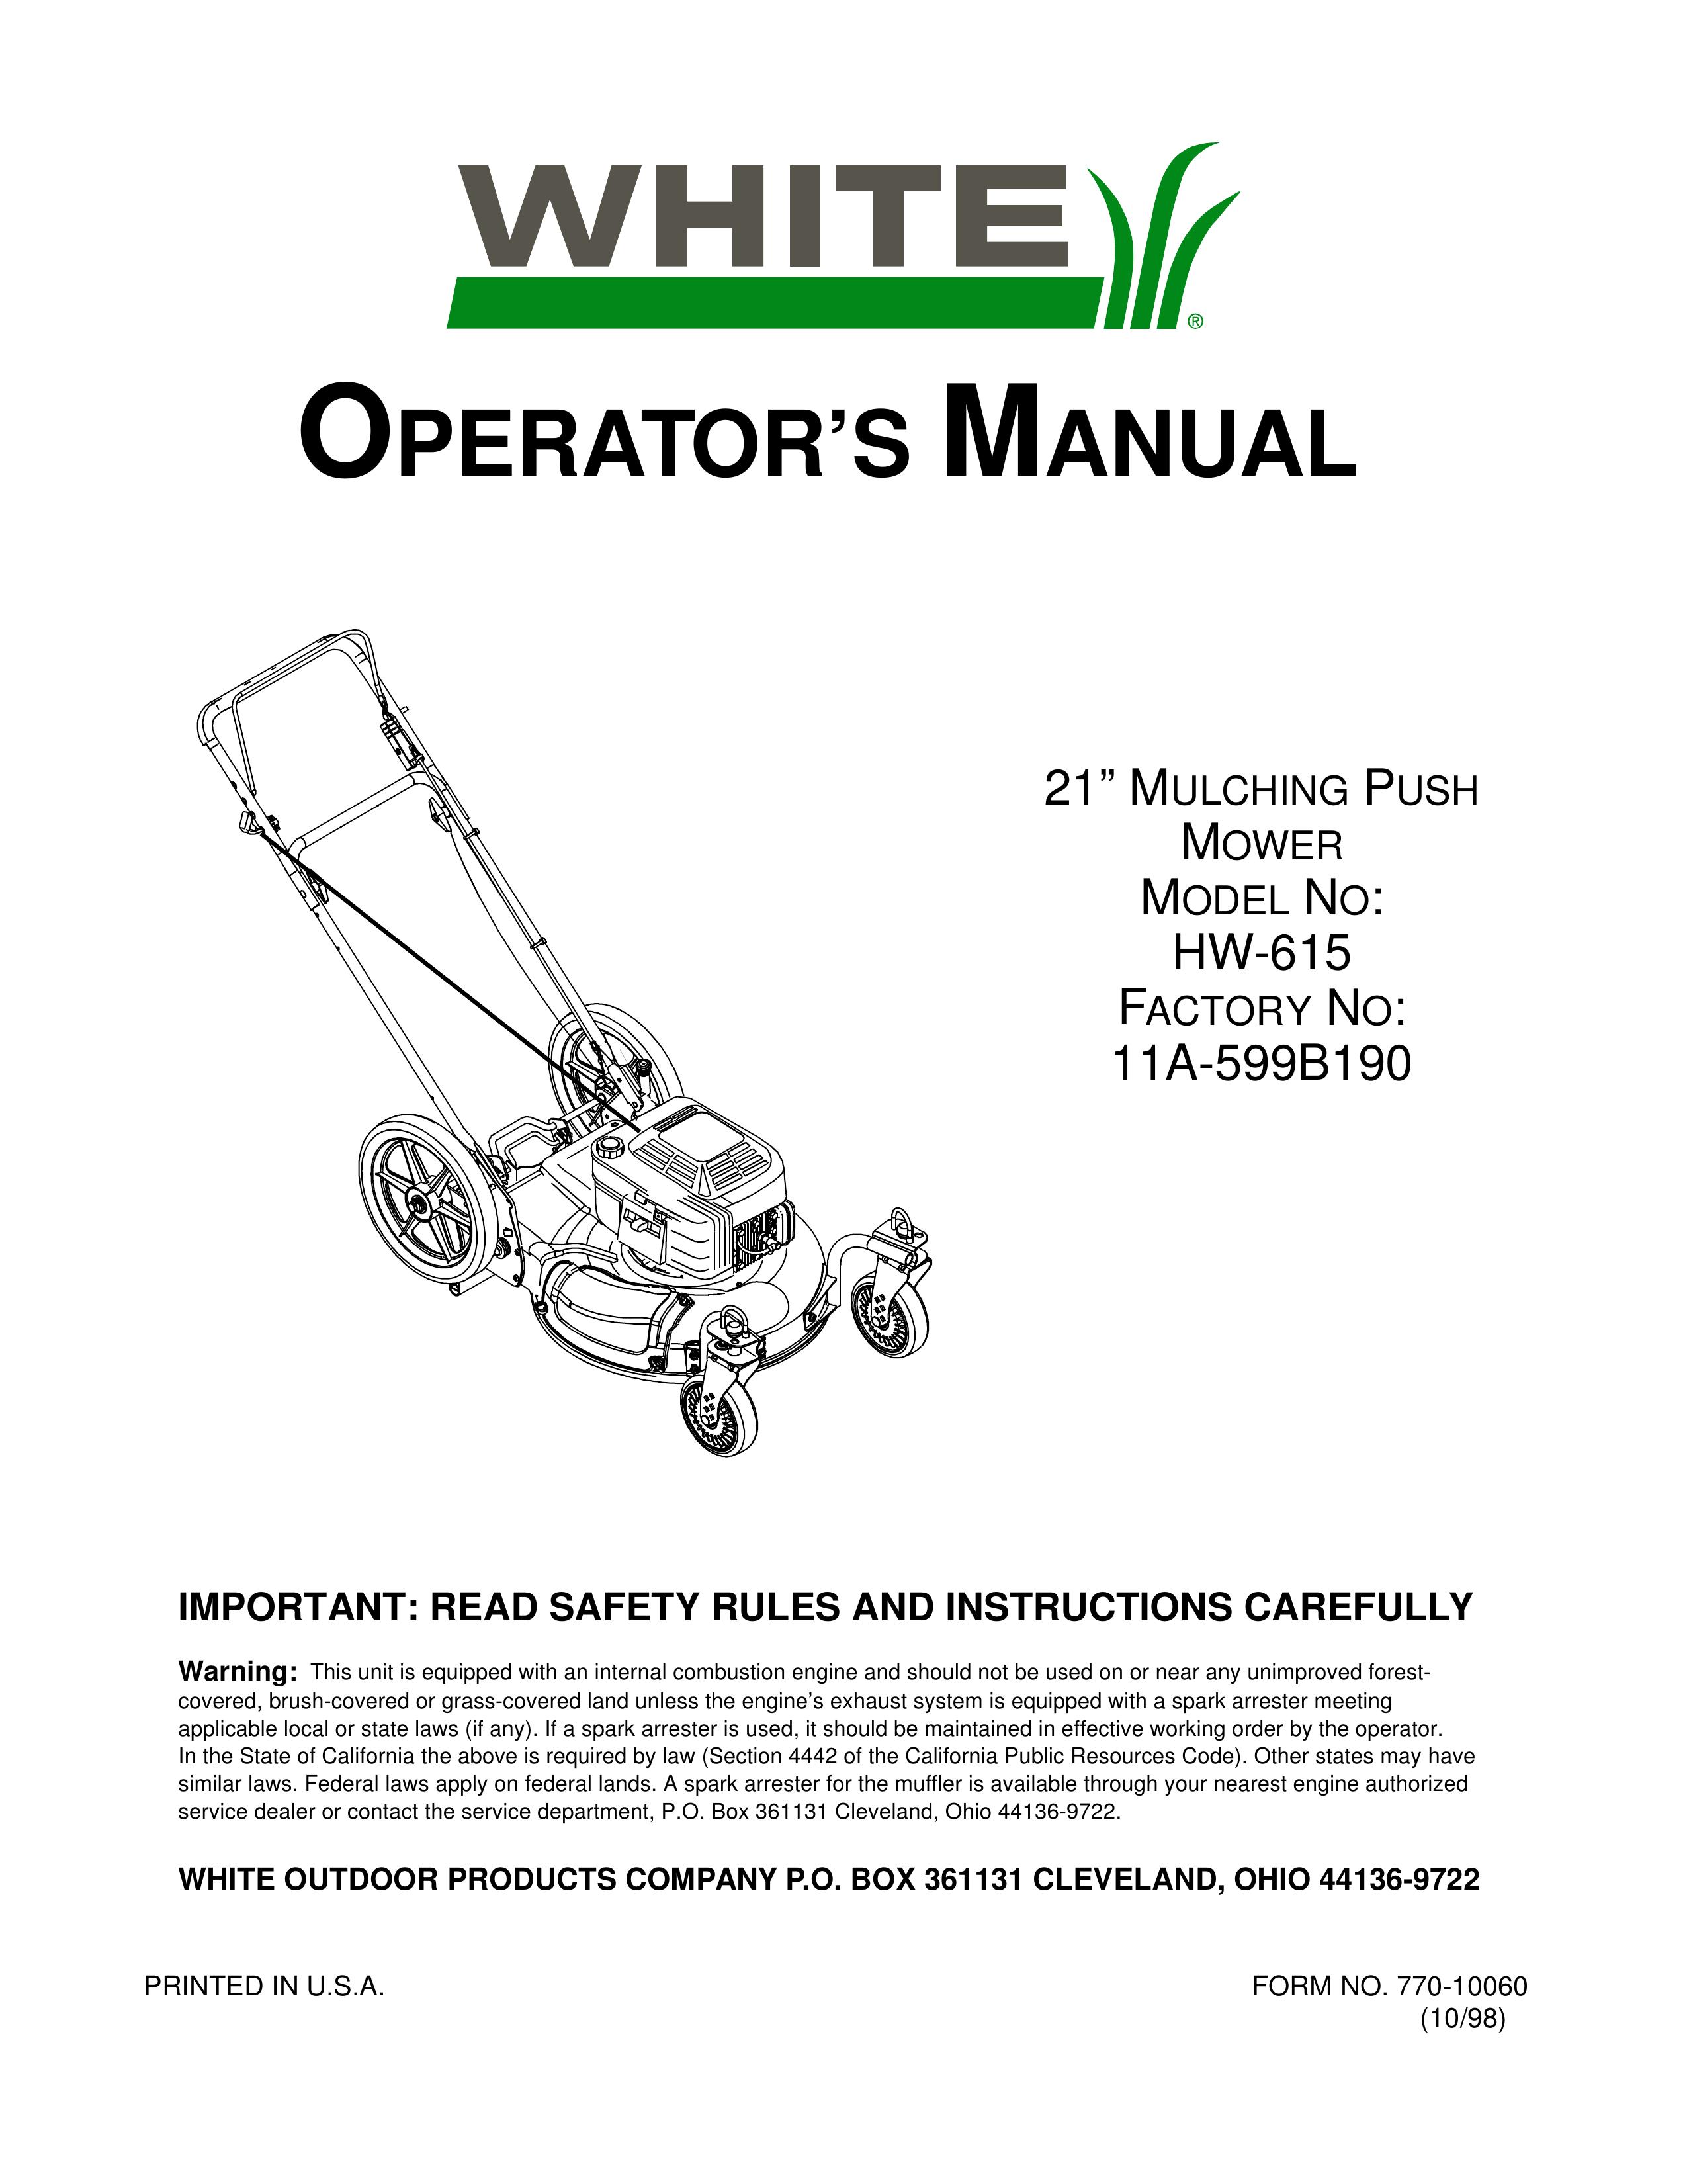 White Outdoor HW-615 Lawn Mower User Manual